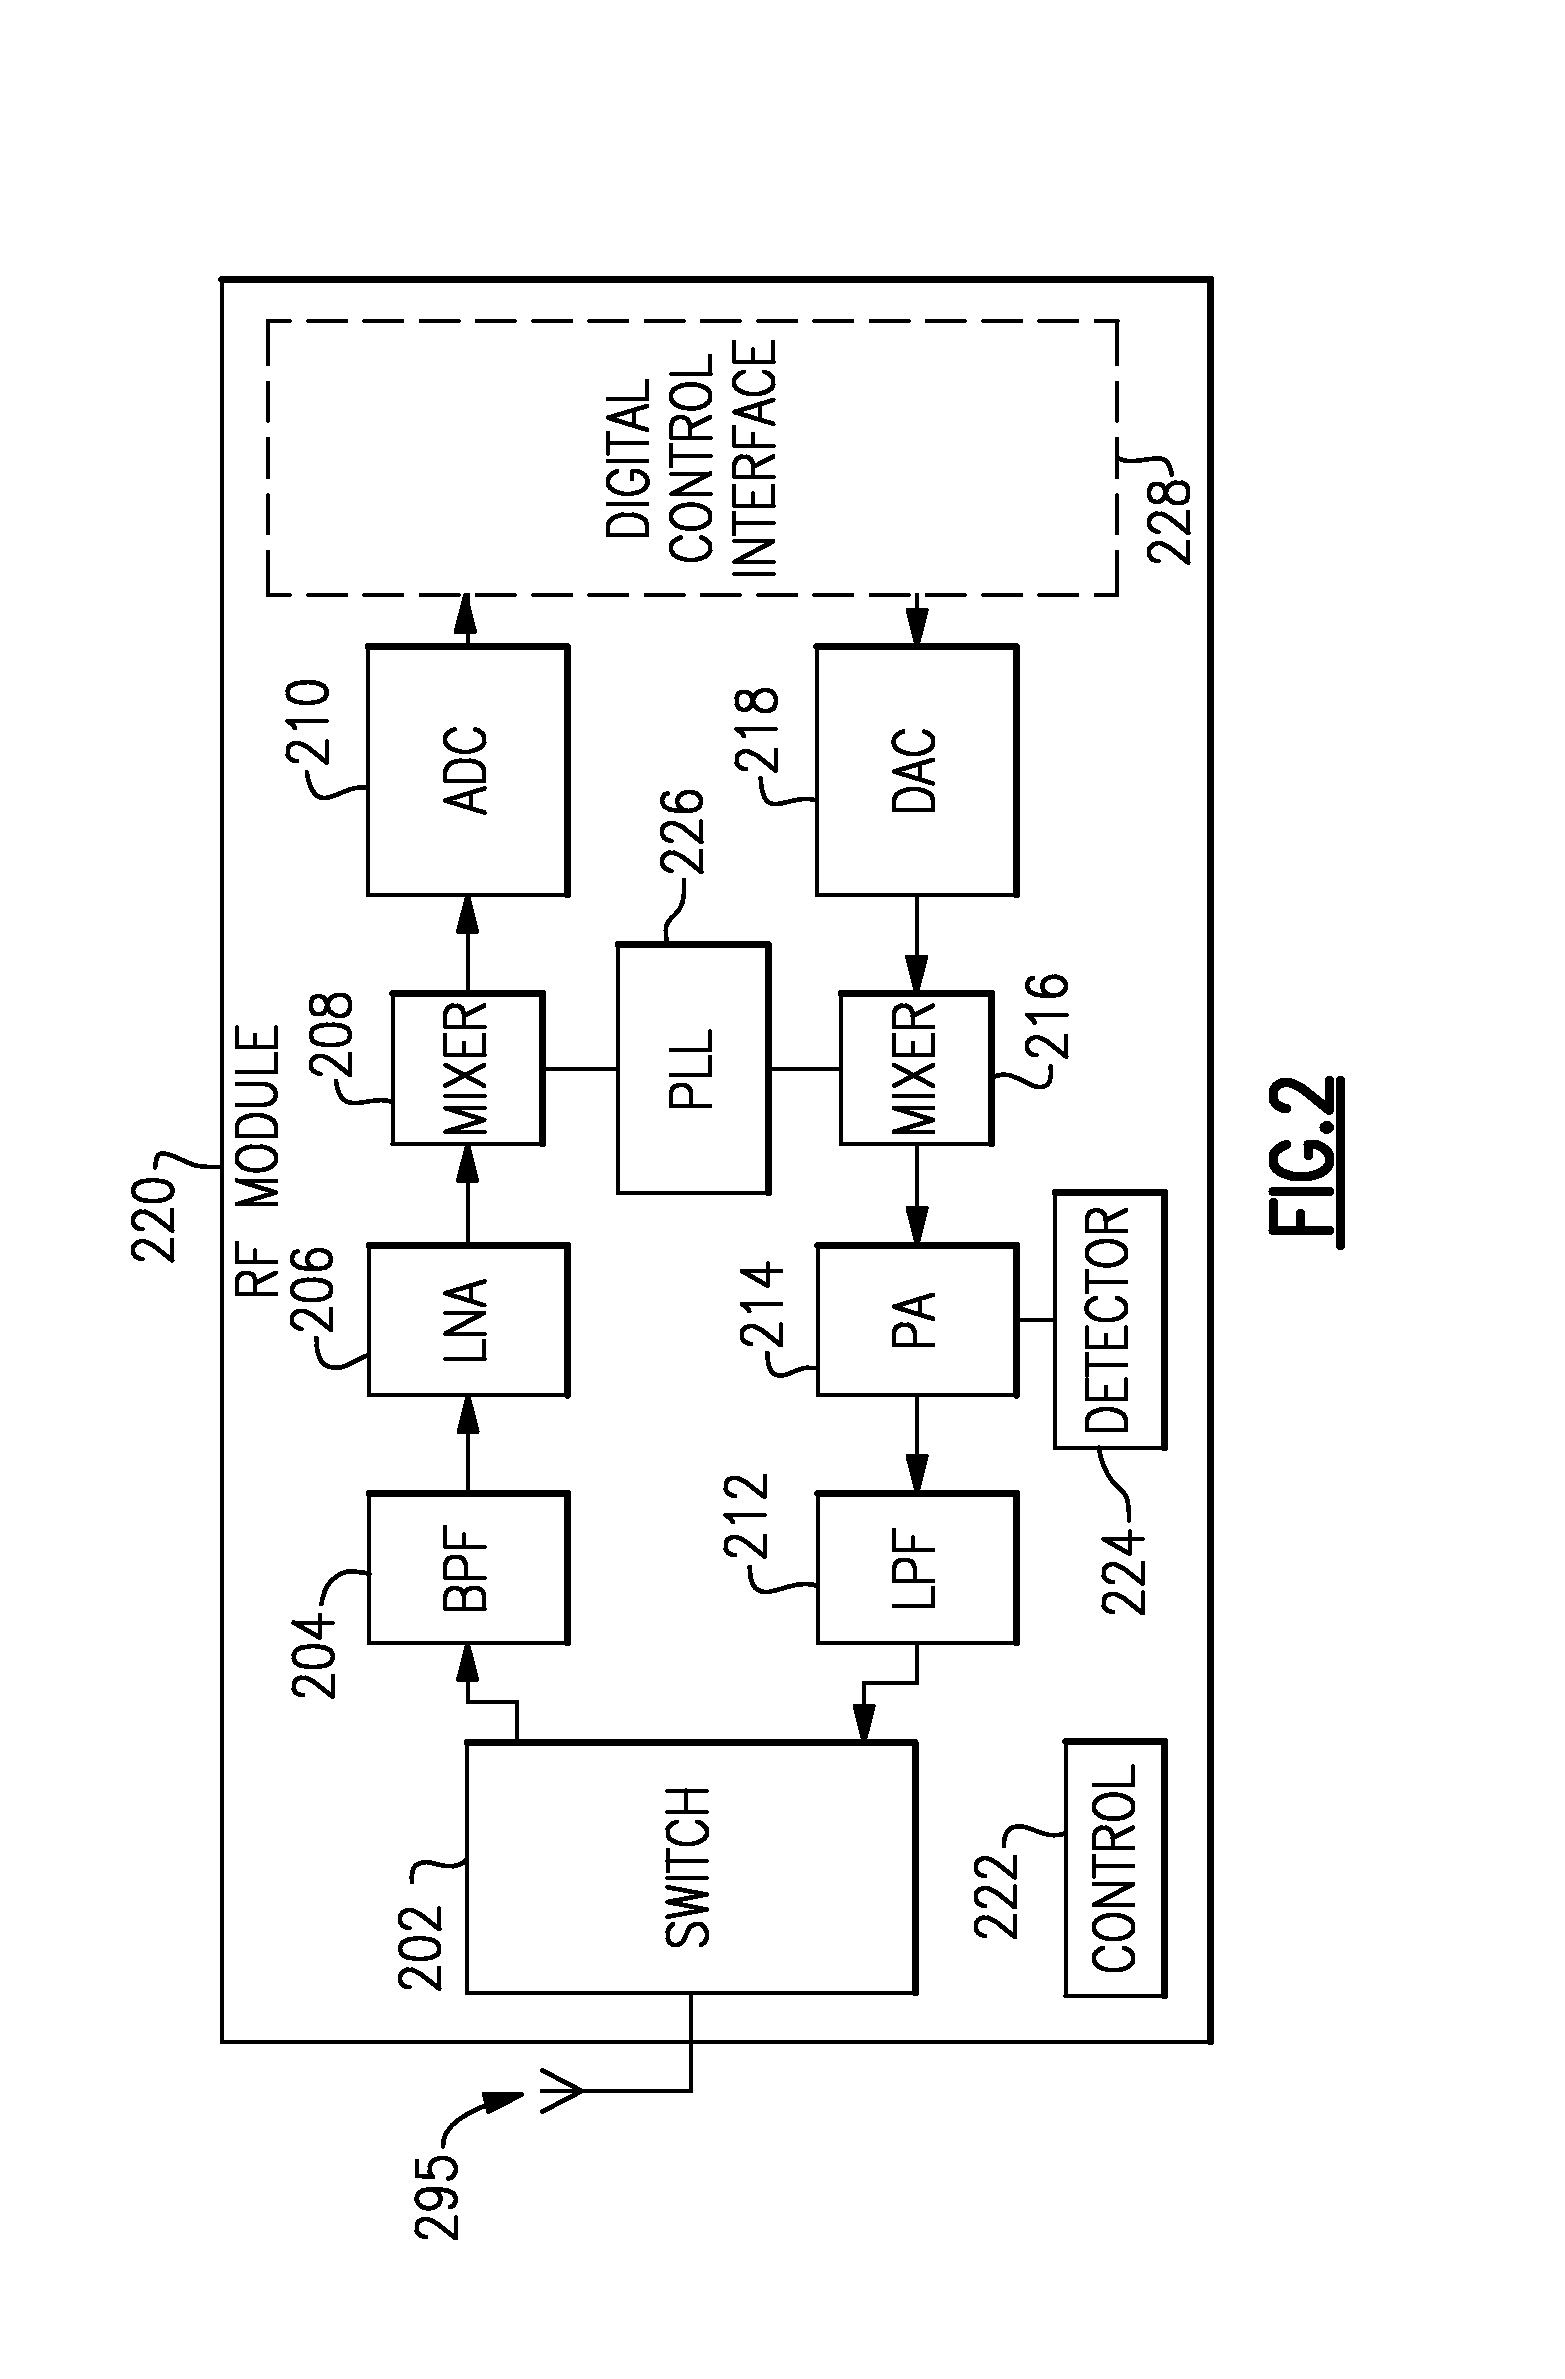 Semiconductor substrate having high and low-resistivity portions